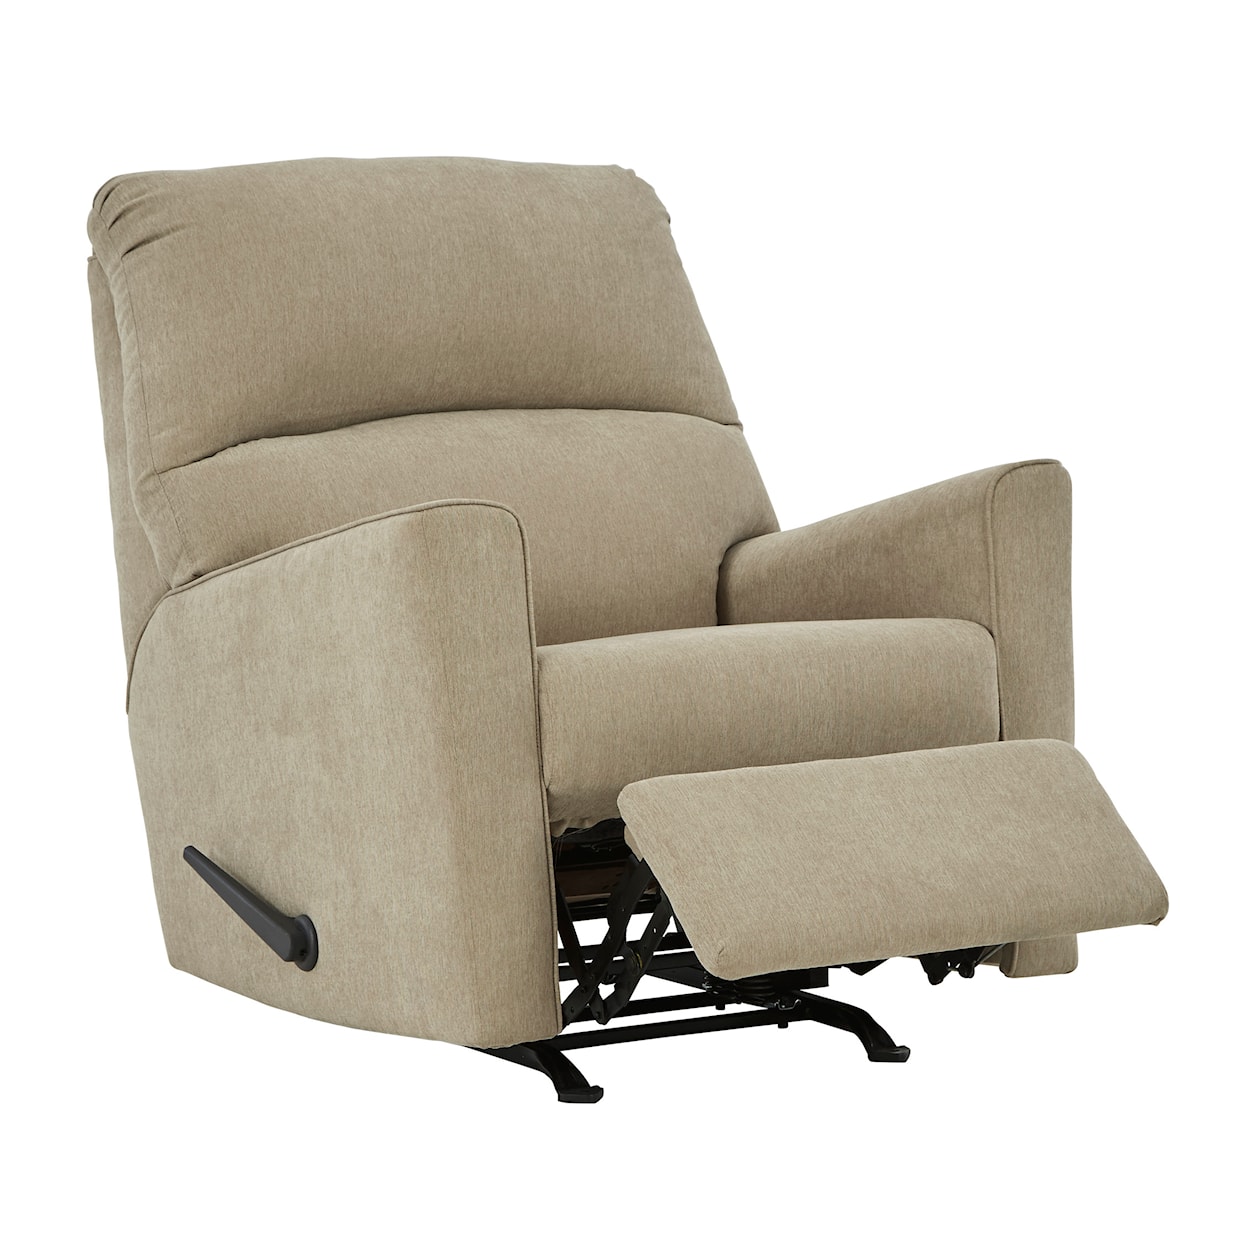 Signature Design by Ashley Lucina Recliner